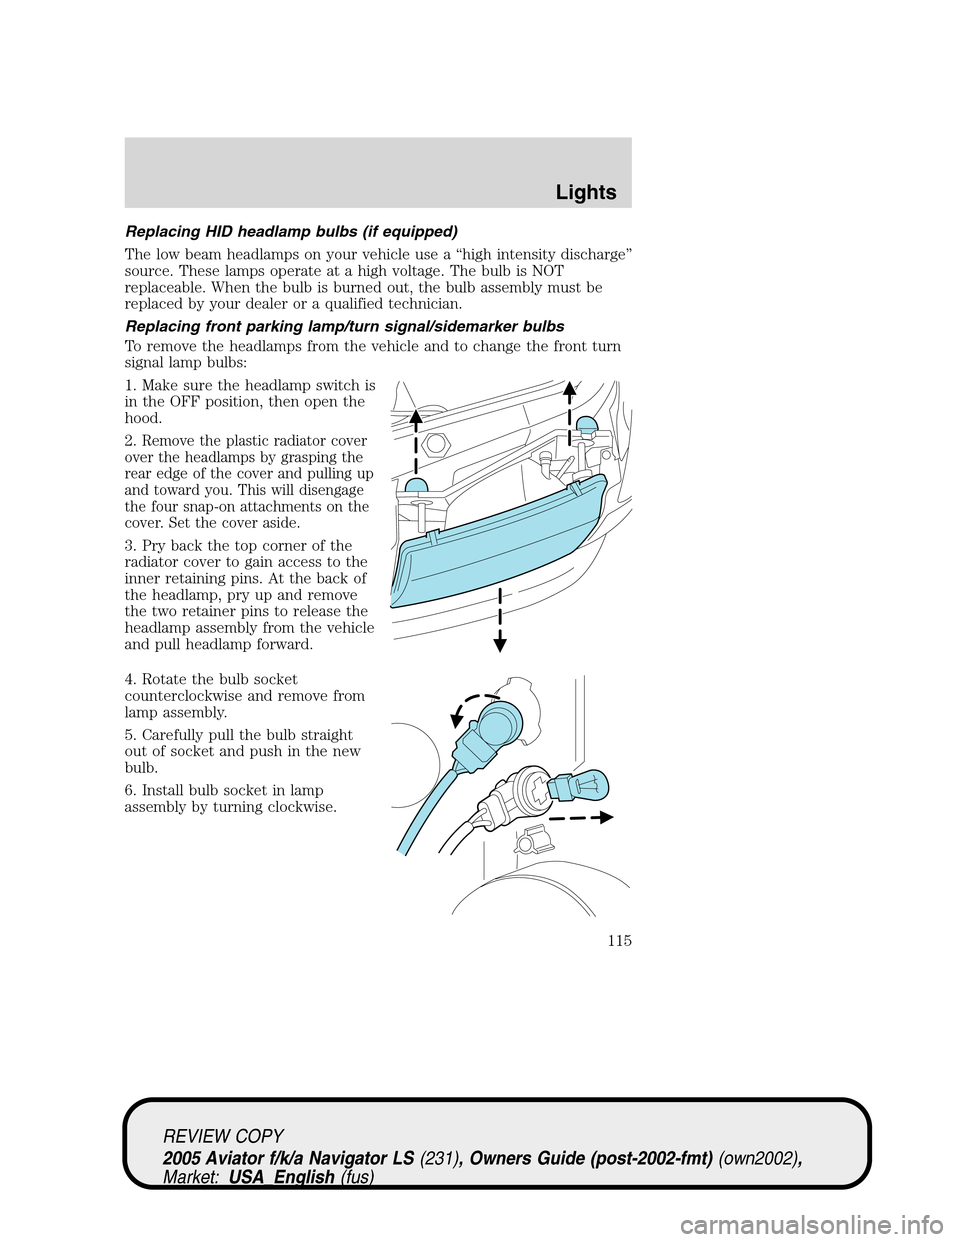 LINCOLN AVIATOR 2005 User Guide Replacing HID headlamp bulbs (if equipped)
The low beam headlamps on your vehicle use a“high intensity discharge”
source. These lamps operate at a high voltage. The bulb is NOT
replaceable. When t